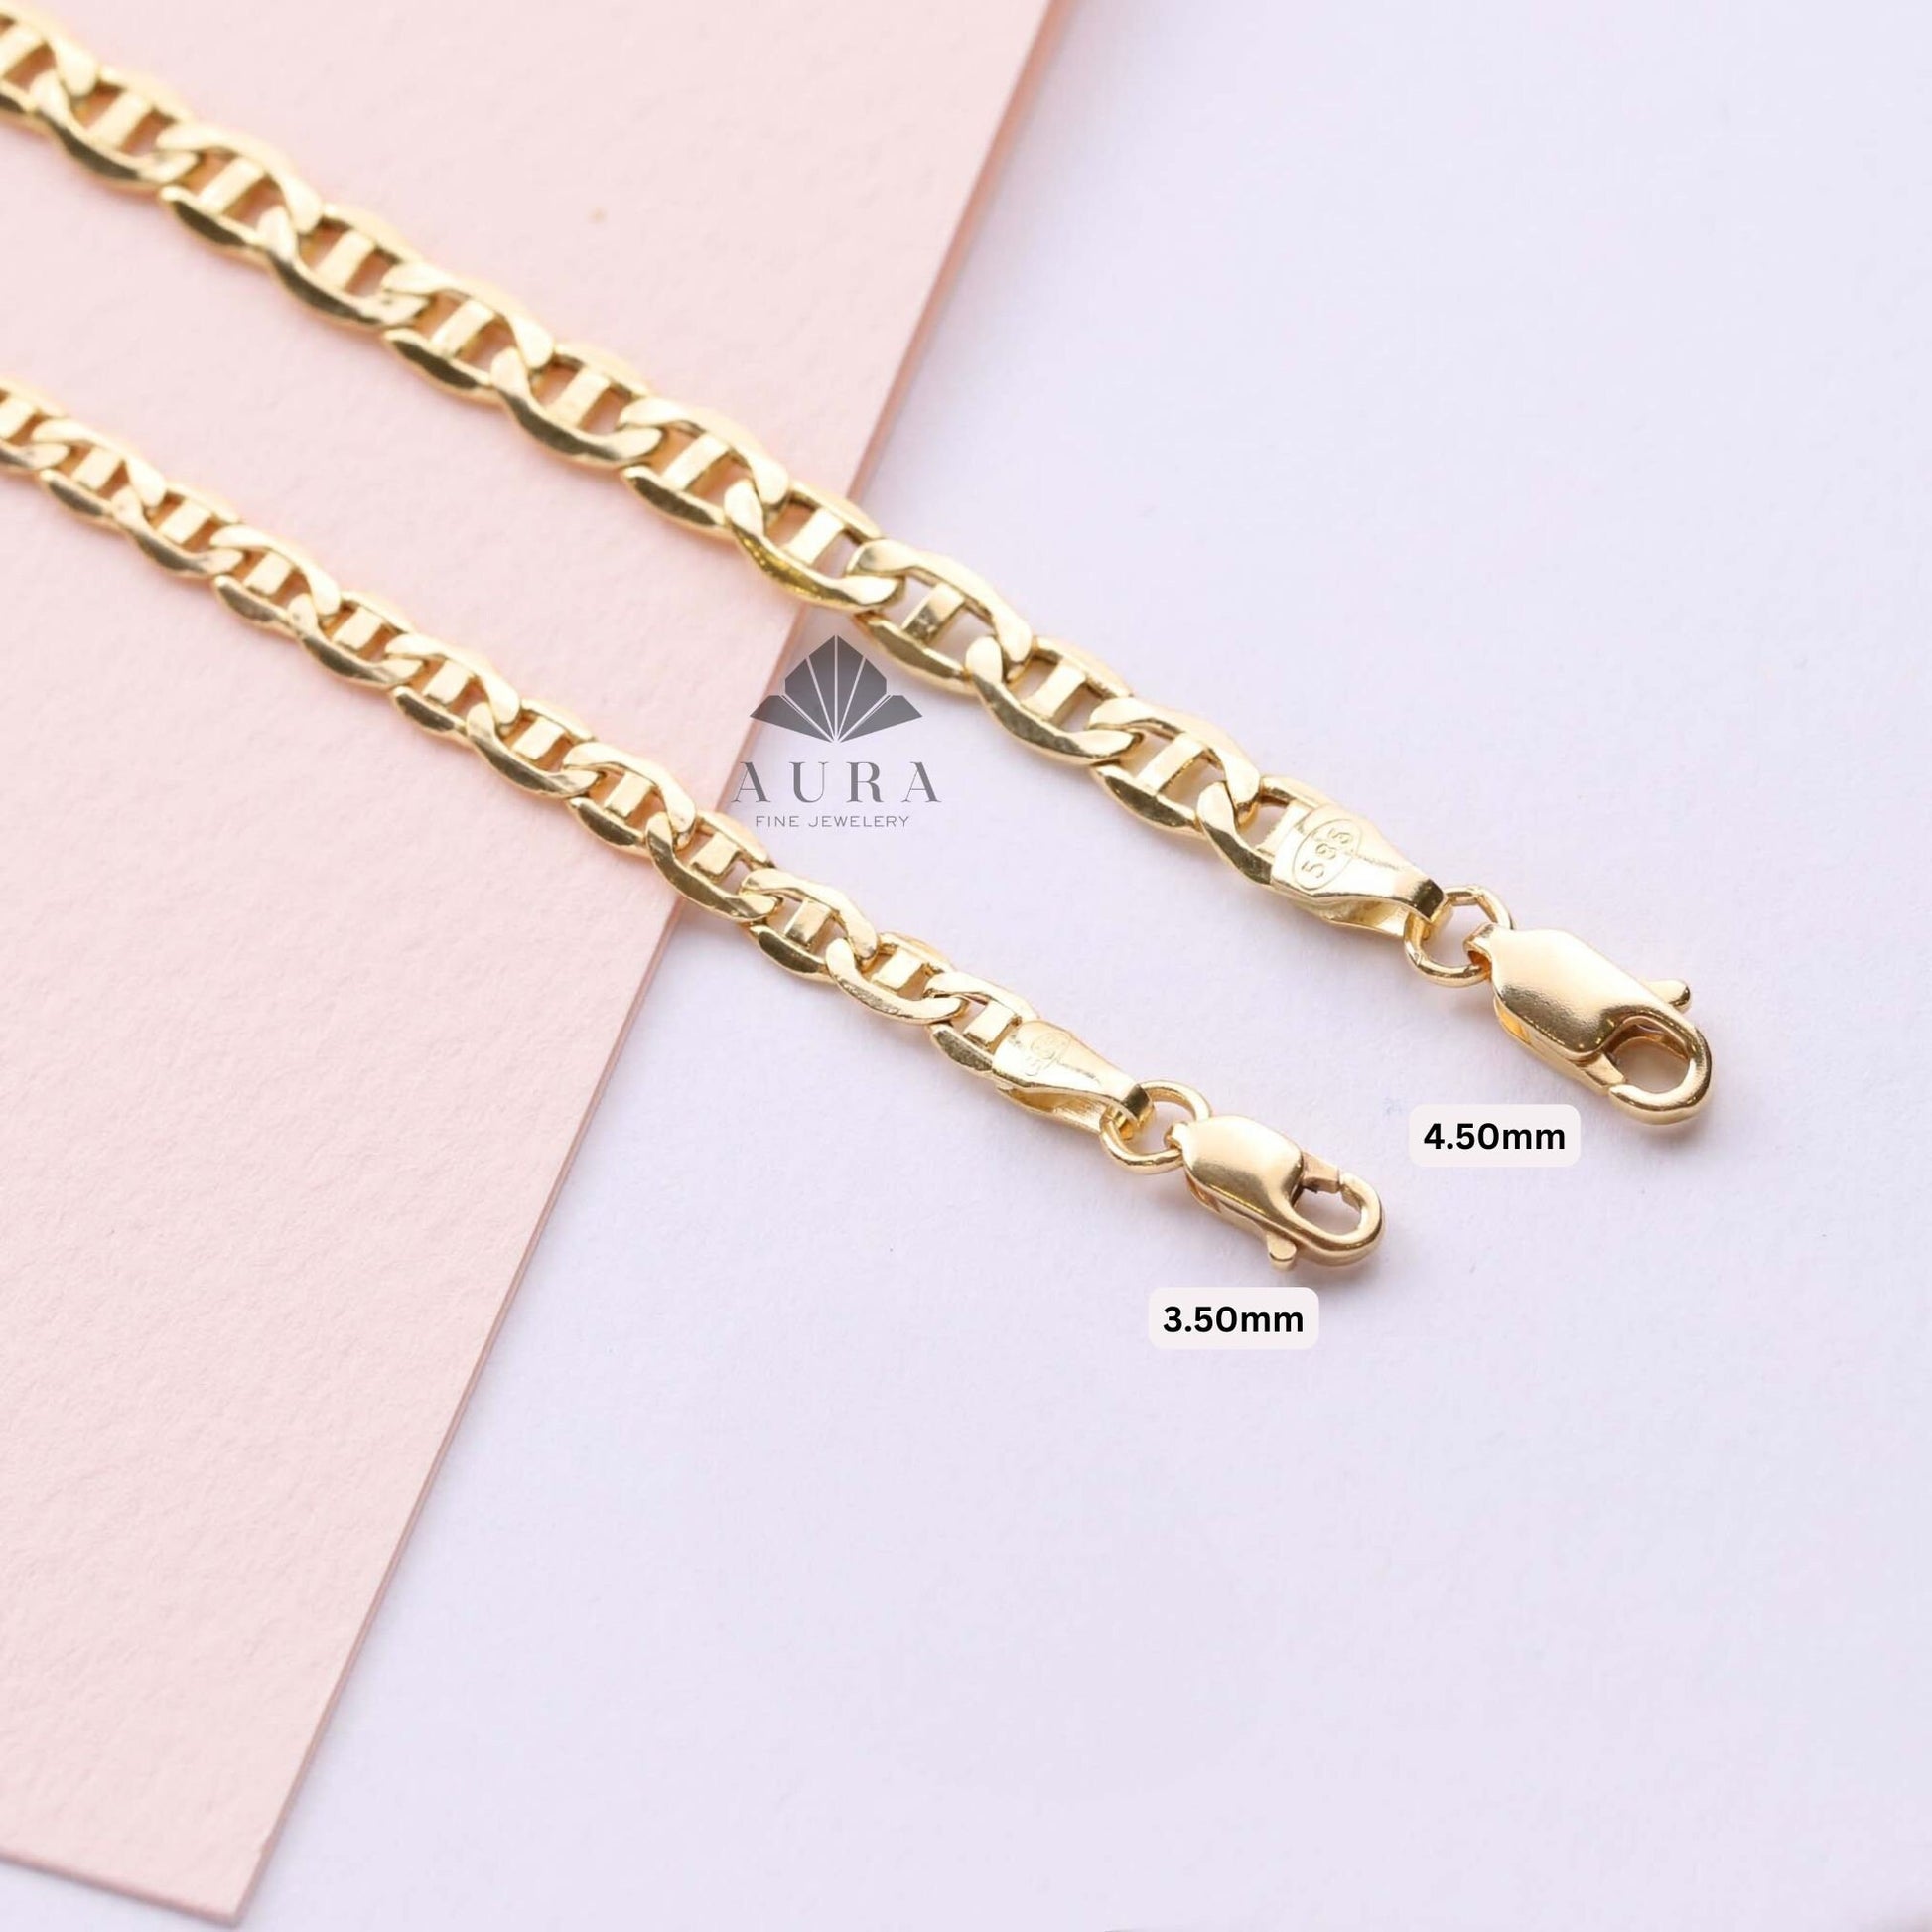 14K Gold Mariner Necklace, 3mm 4mm Mariner Chain Necklace, Flat Anchor Necklace, Real Gold Necklace, Men Women Necklace, Christmas Gift